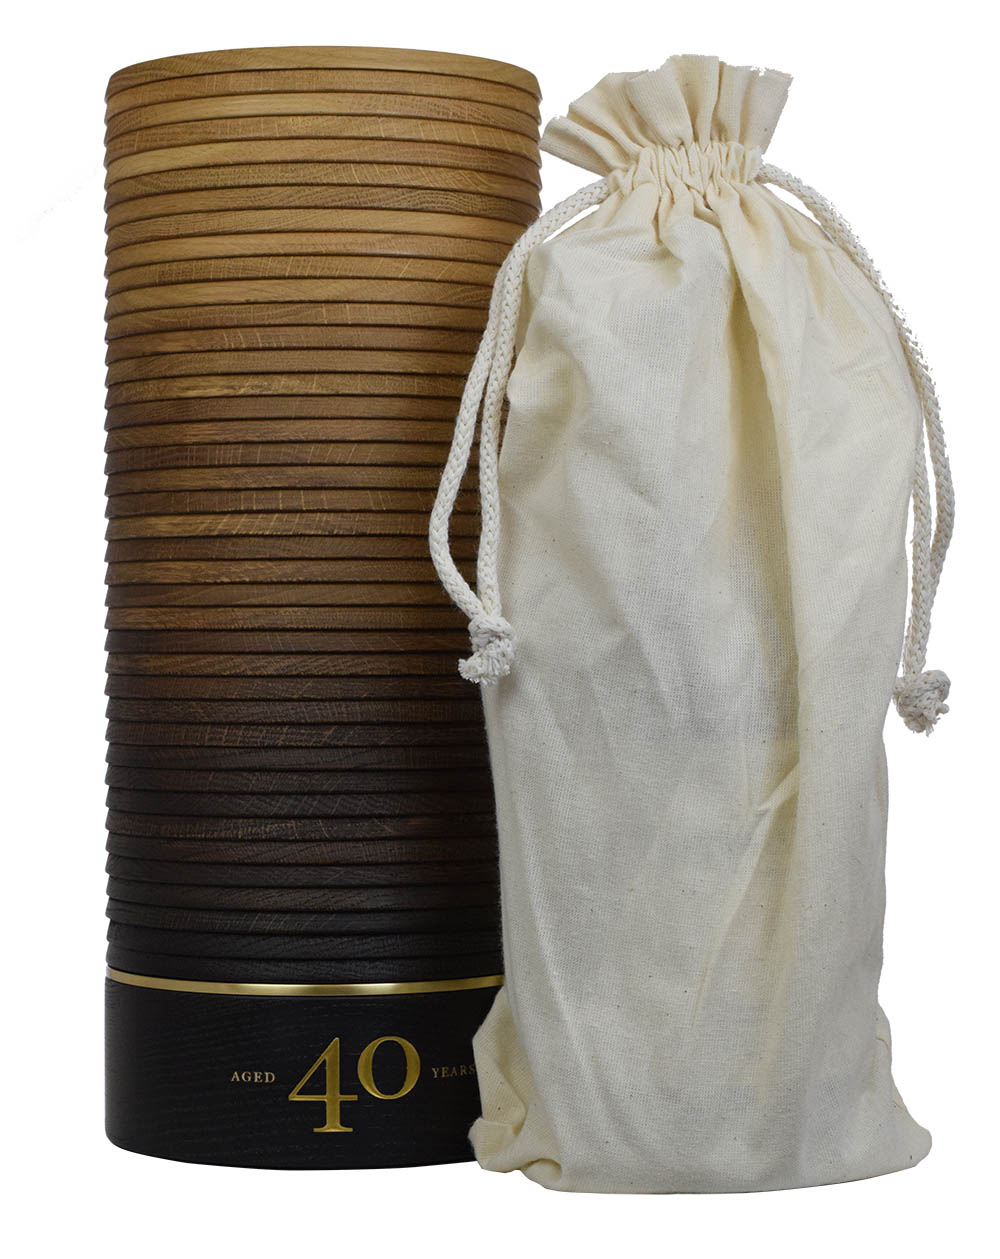 Balvenie 40 Years Old Rare Marriages Tube 2 Must Have Malts MHM